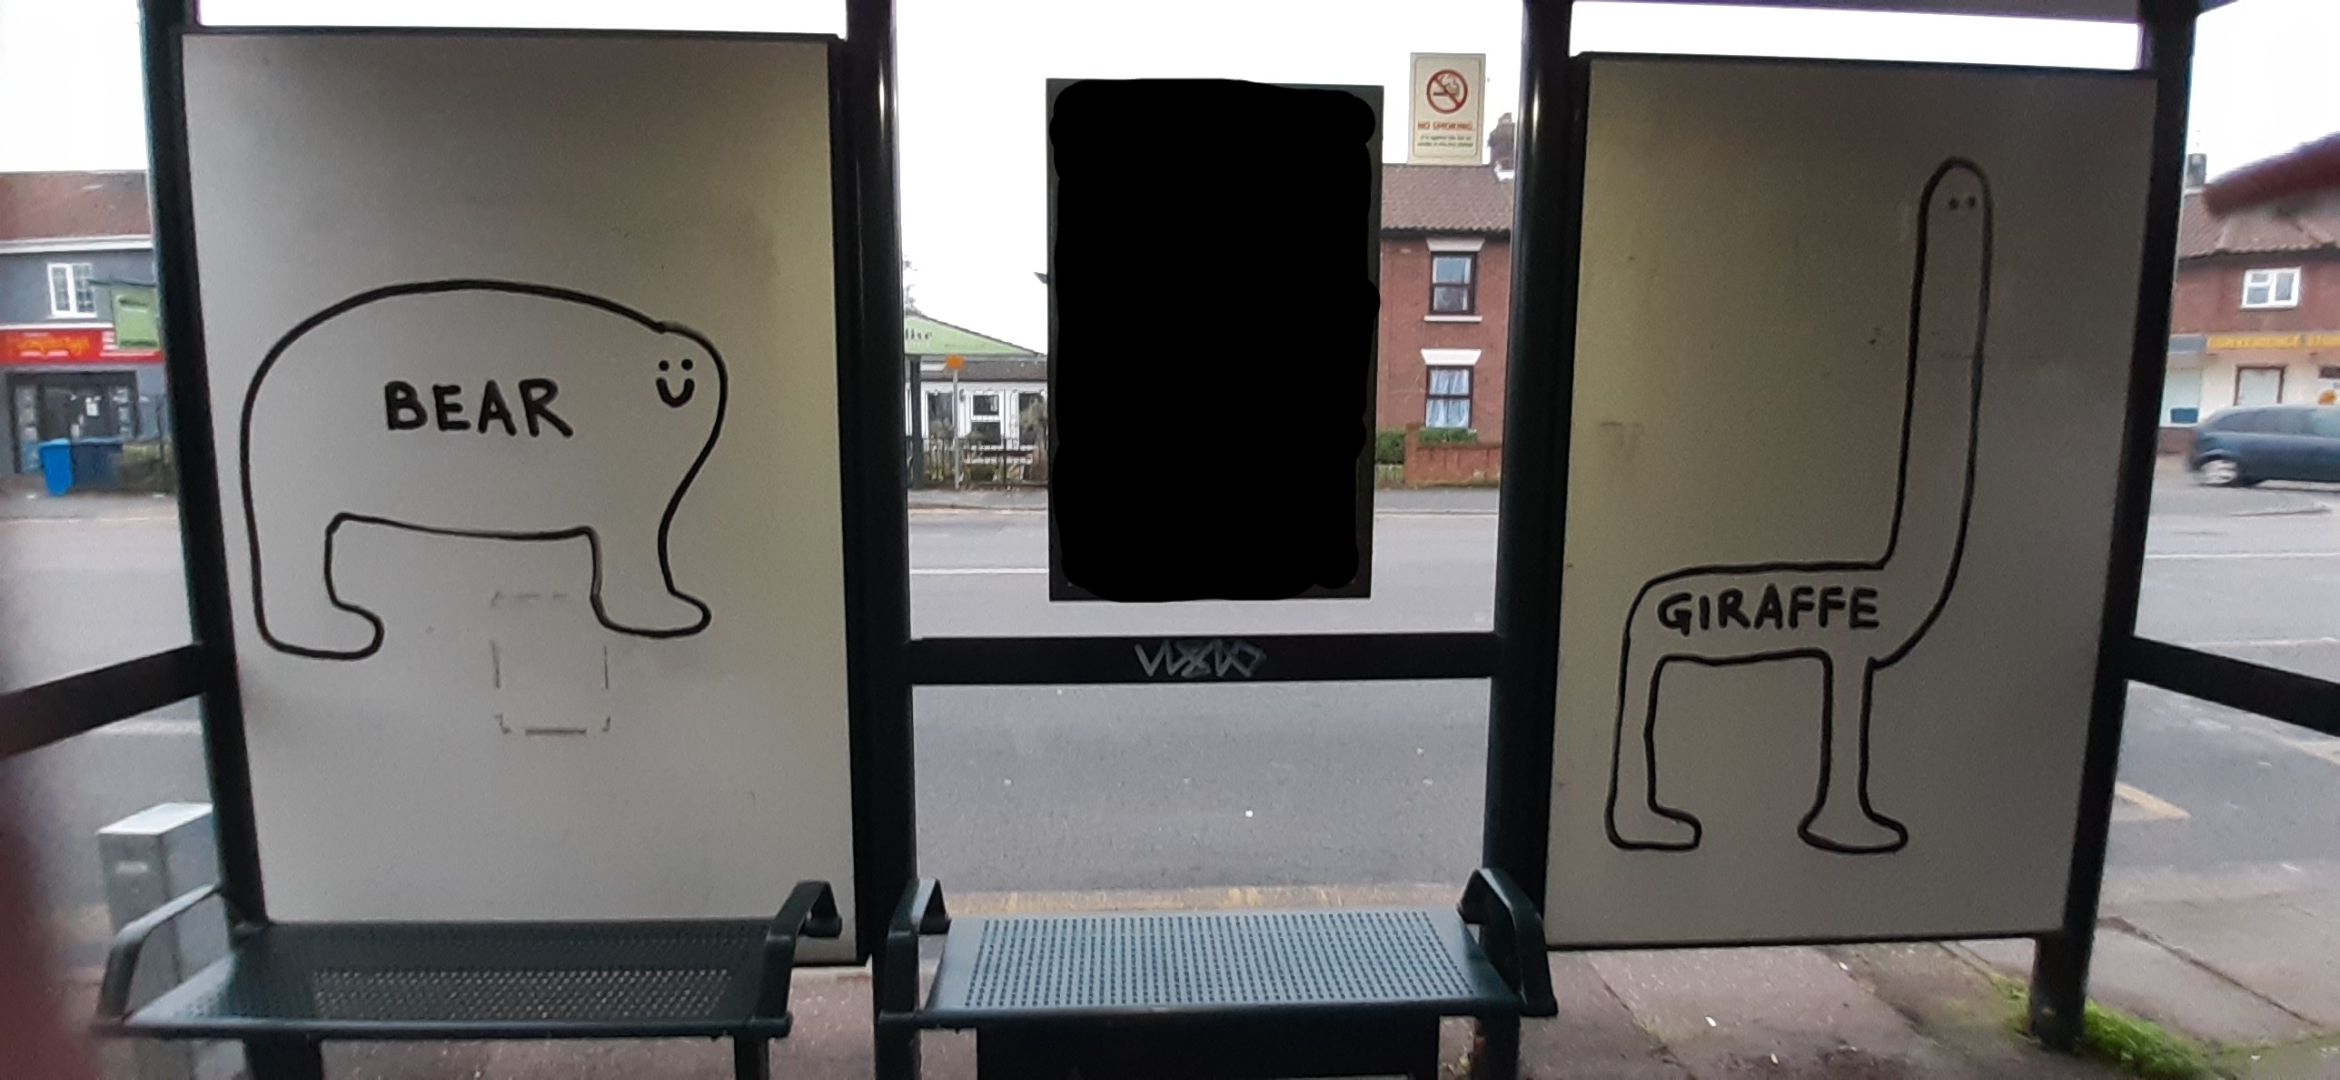 A new art installation at a local bus stop.